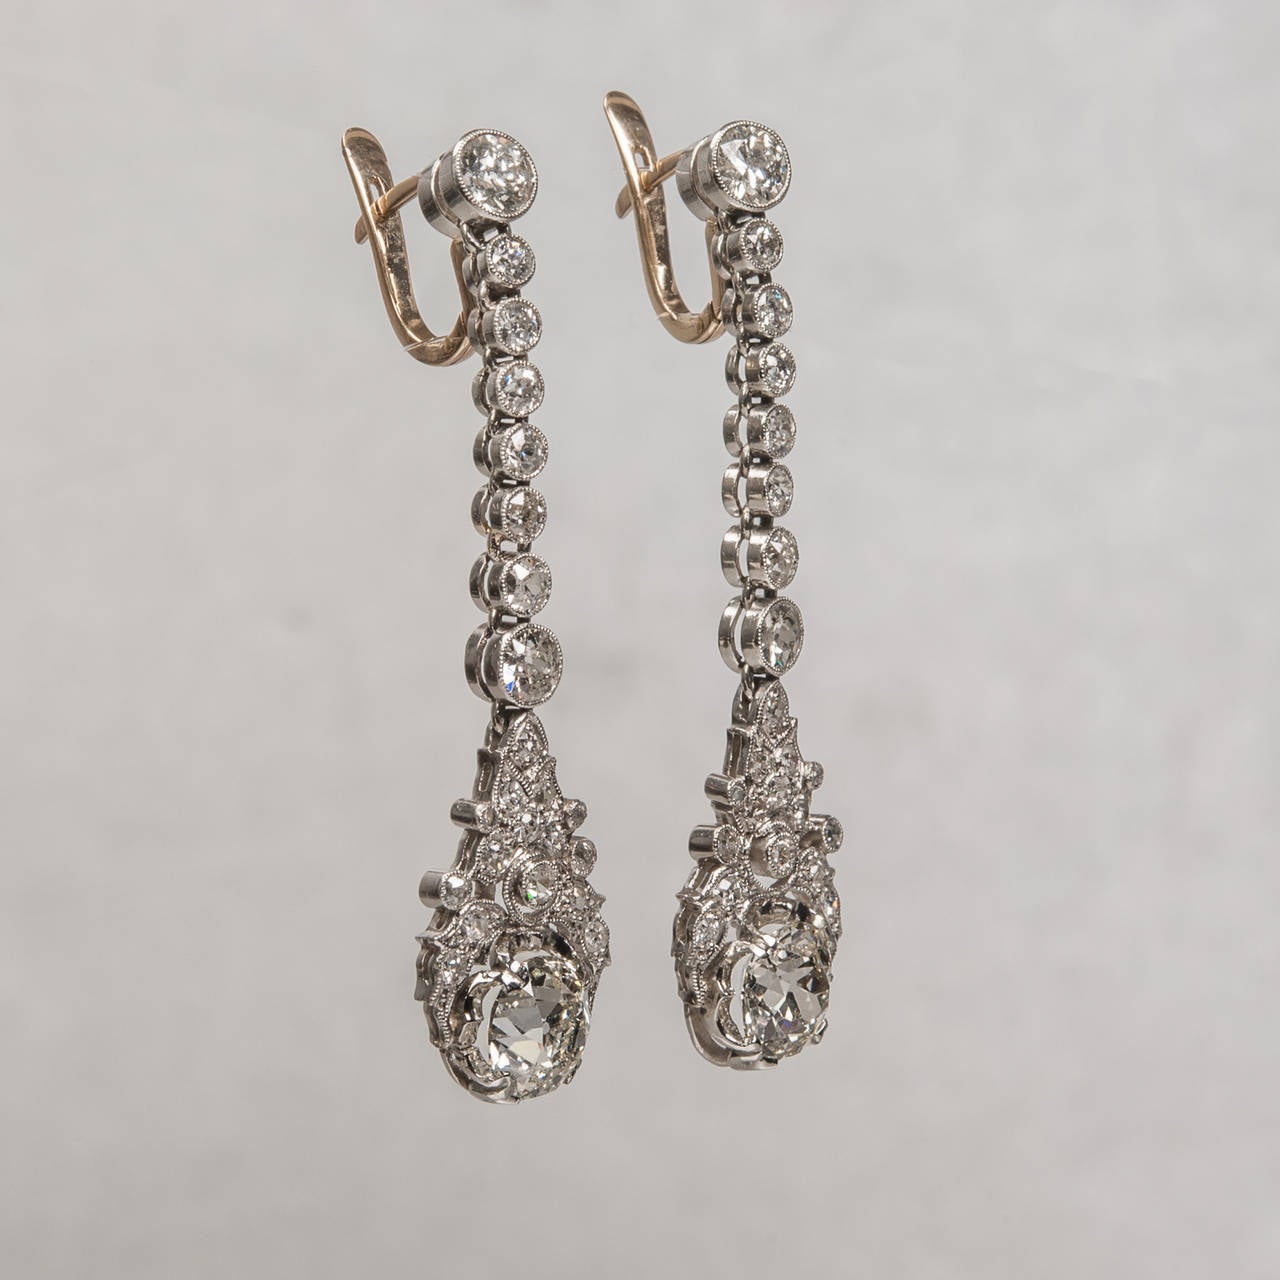 This stunning pair of Edwardian diamond dangle earrings is handcrafted in platinum with all original diamonds. The design features graduated bezel set round diamonds flowing down from the clasp into a lovely floral pattern which displays large Old